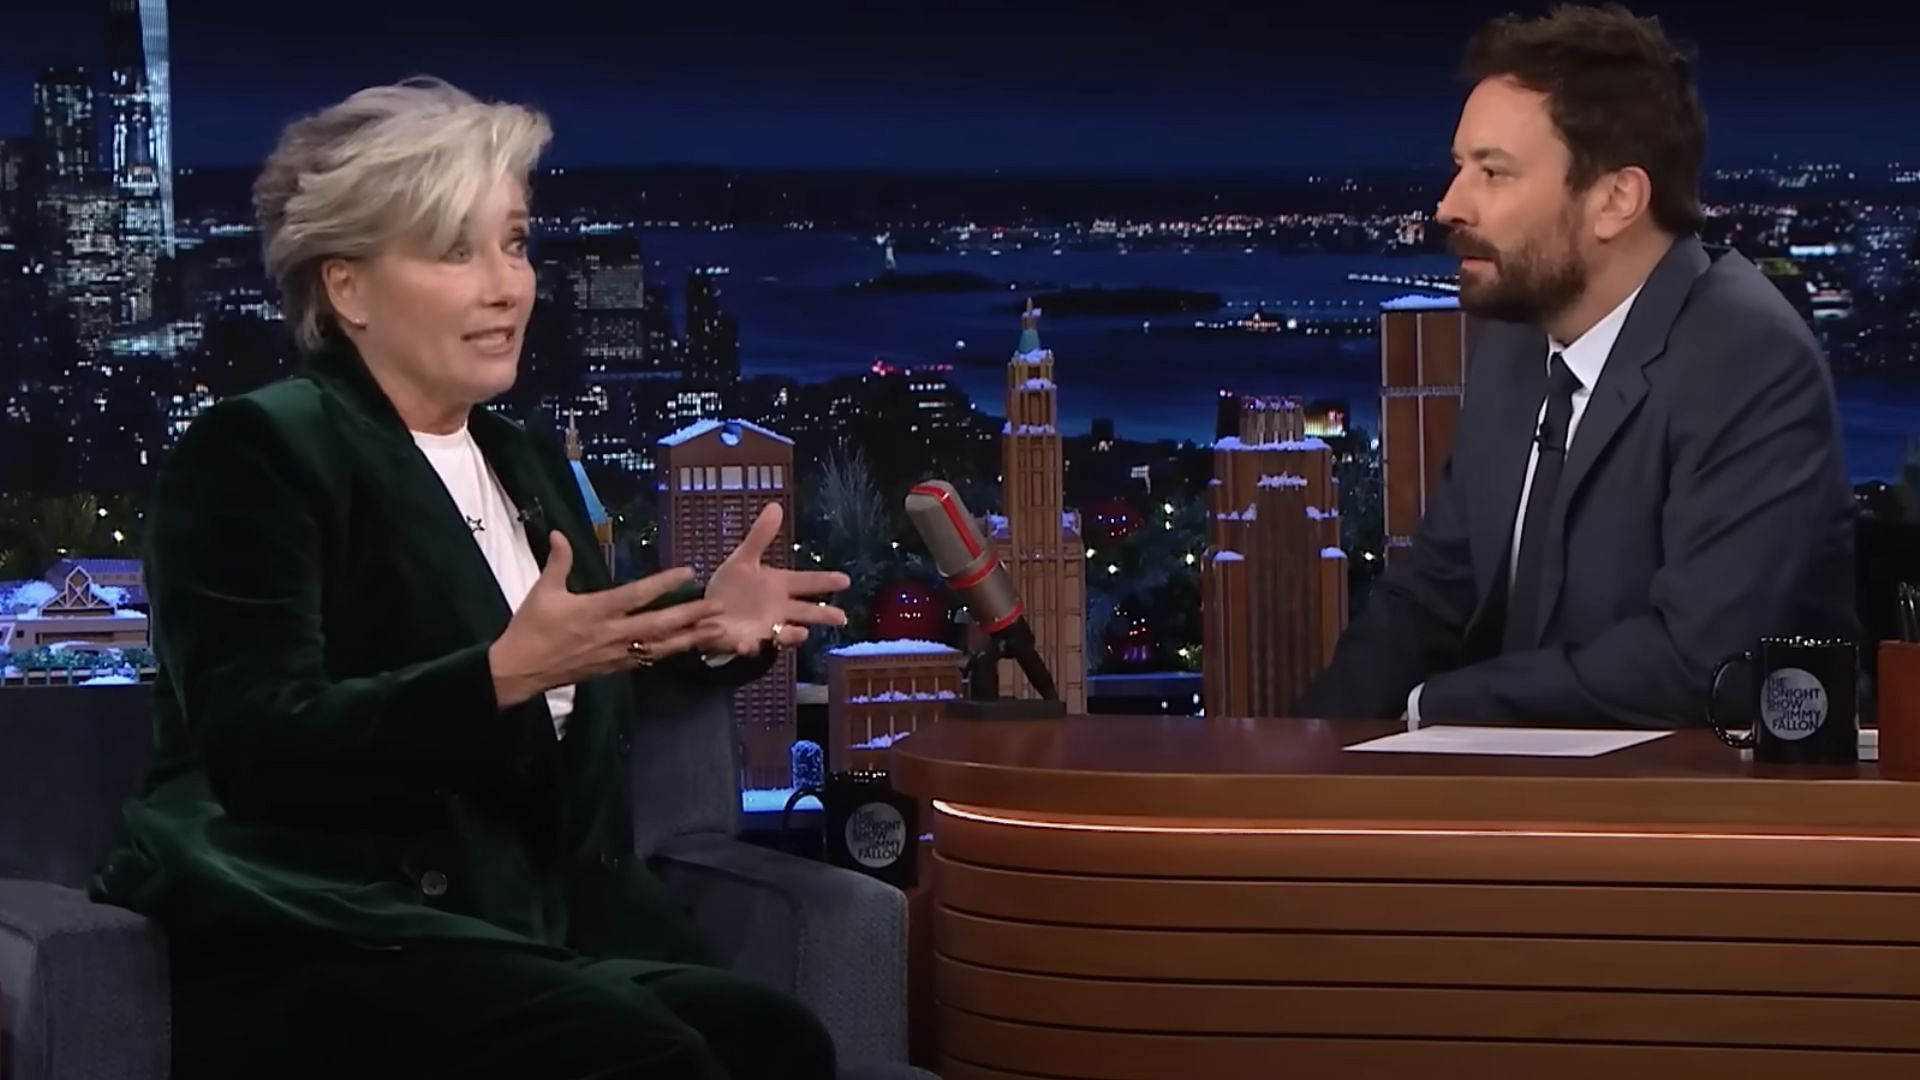 A still of Emma Thompson and Jimmy Fallon from The Tonight Show Starring Jimmy Fallon (Image Via The Tonight Show Starring Jimmy Fallon/YouTube)